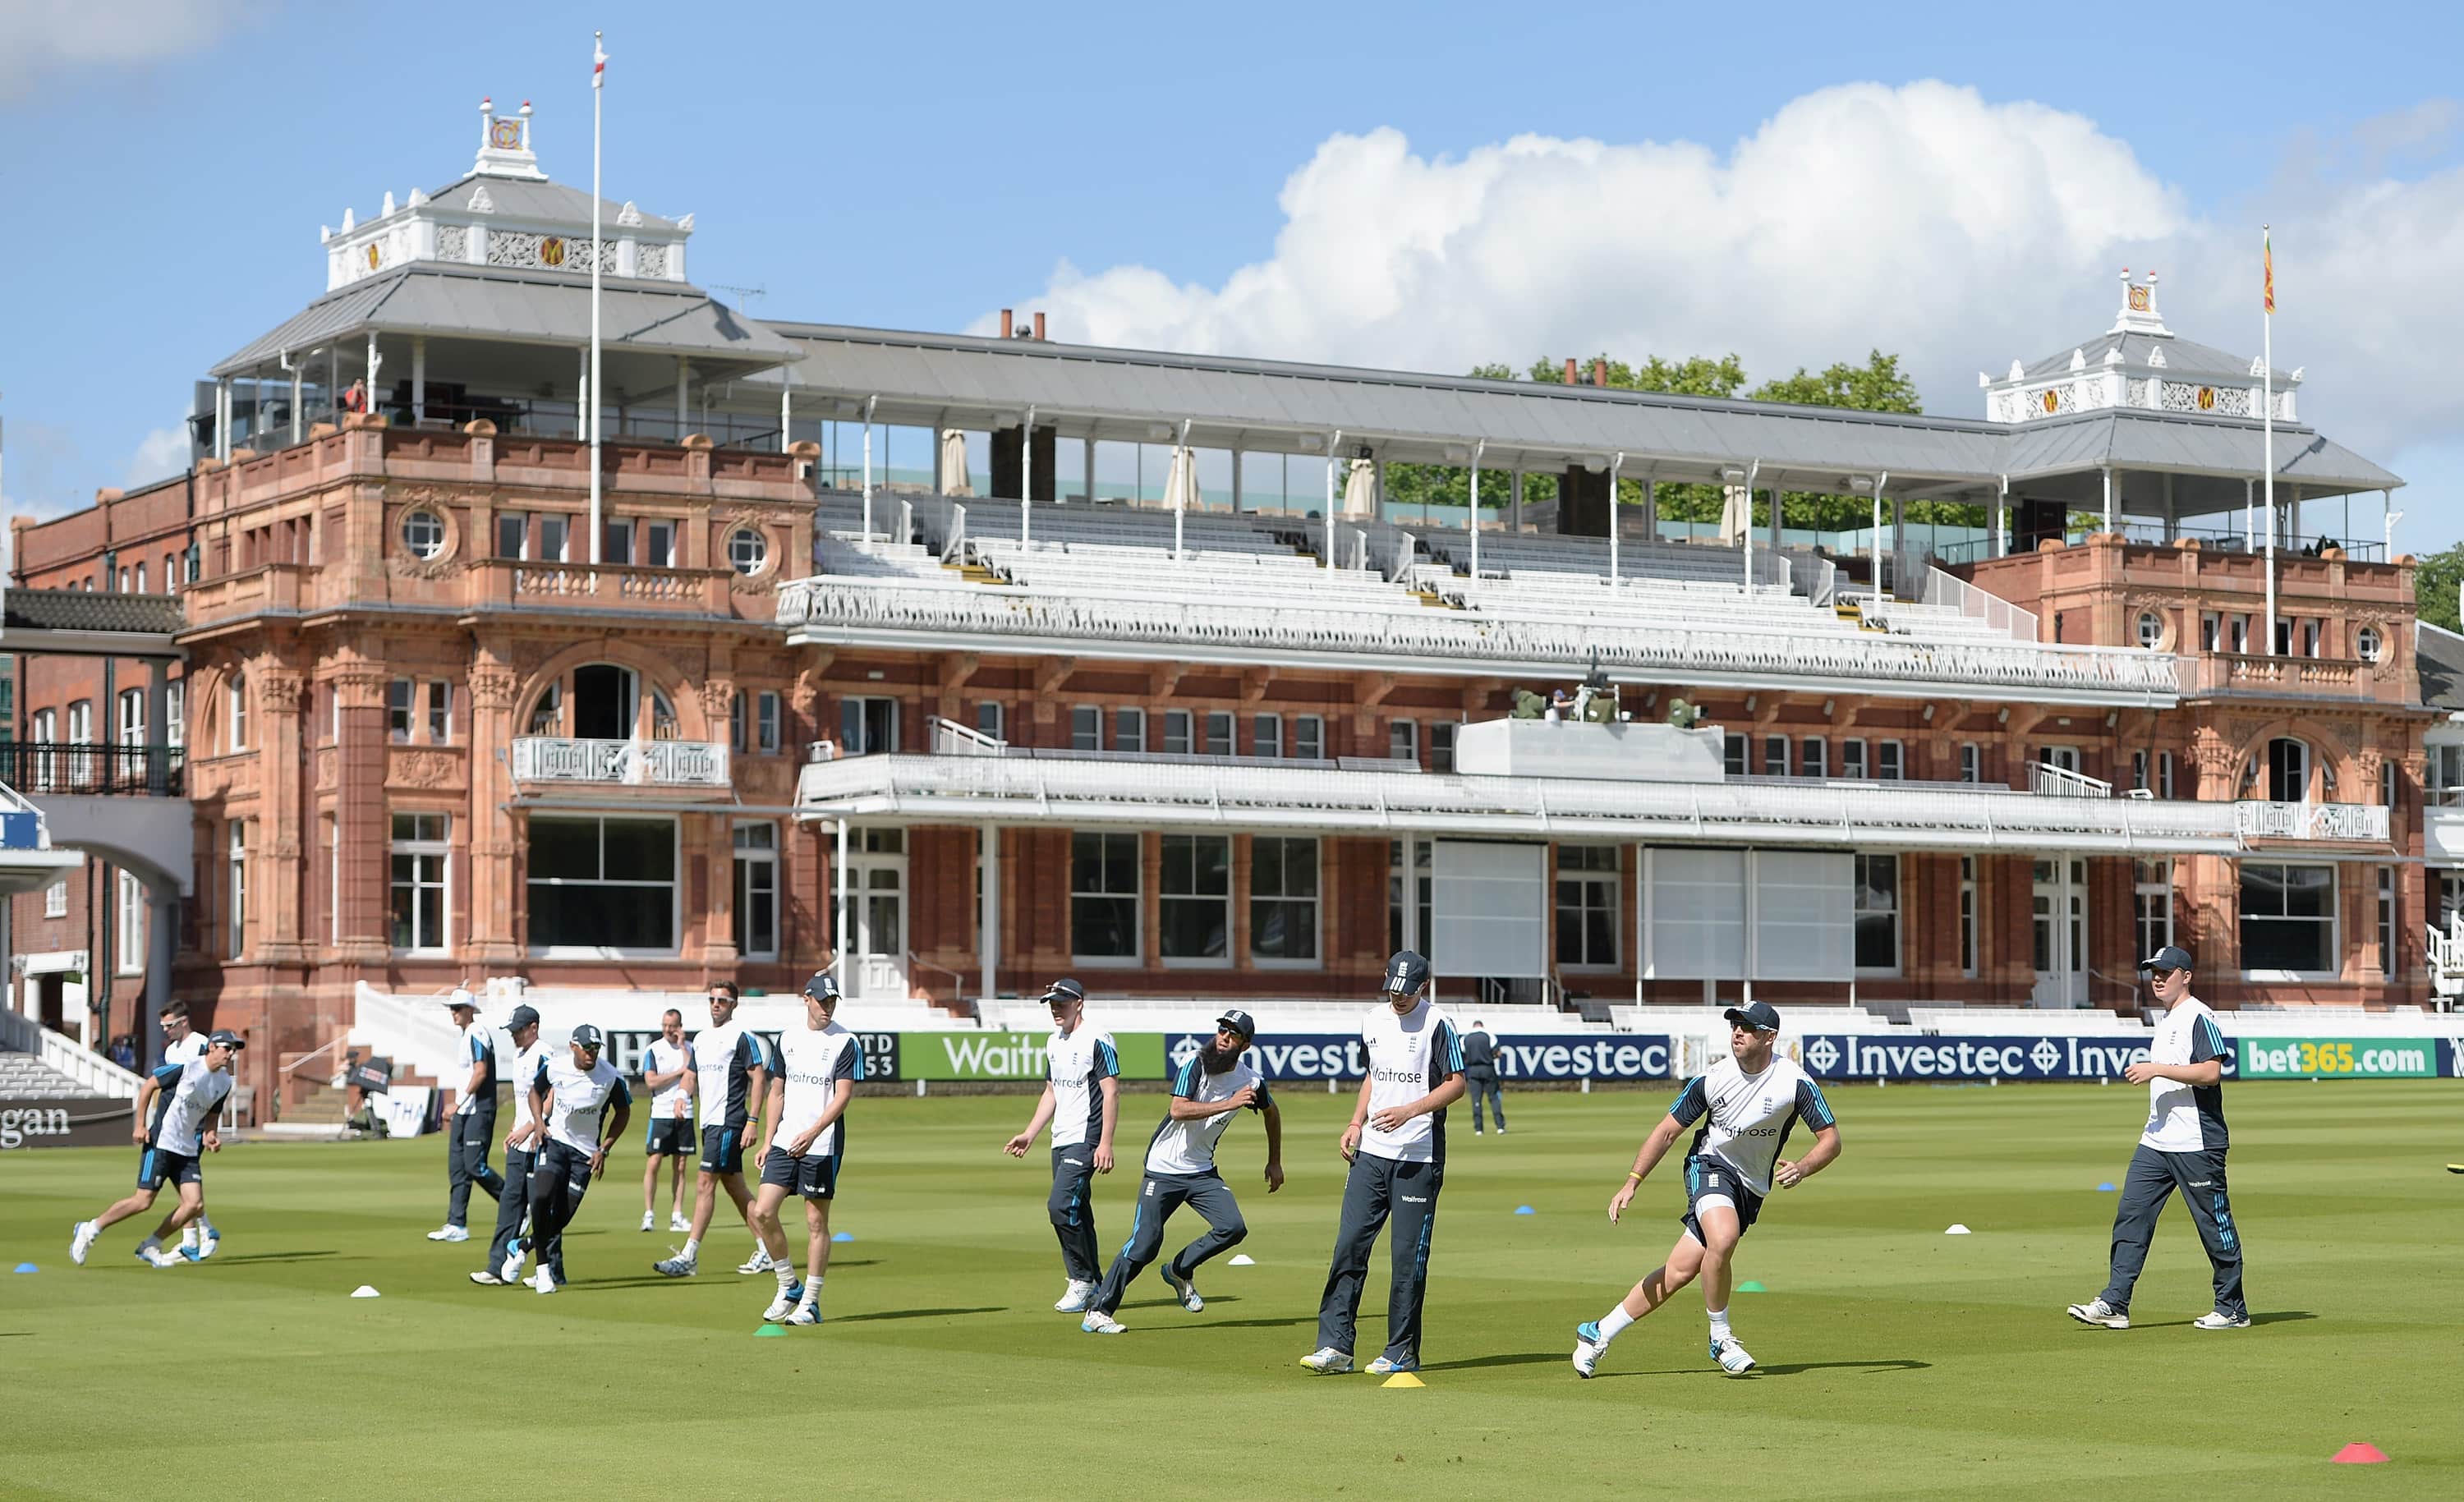 Lord's Cricket Ground: History, Capacity, Events & Significance